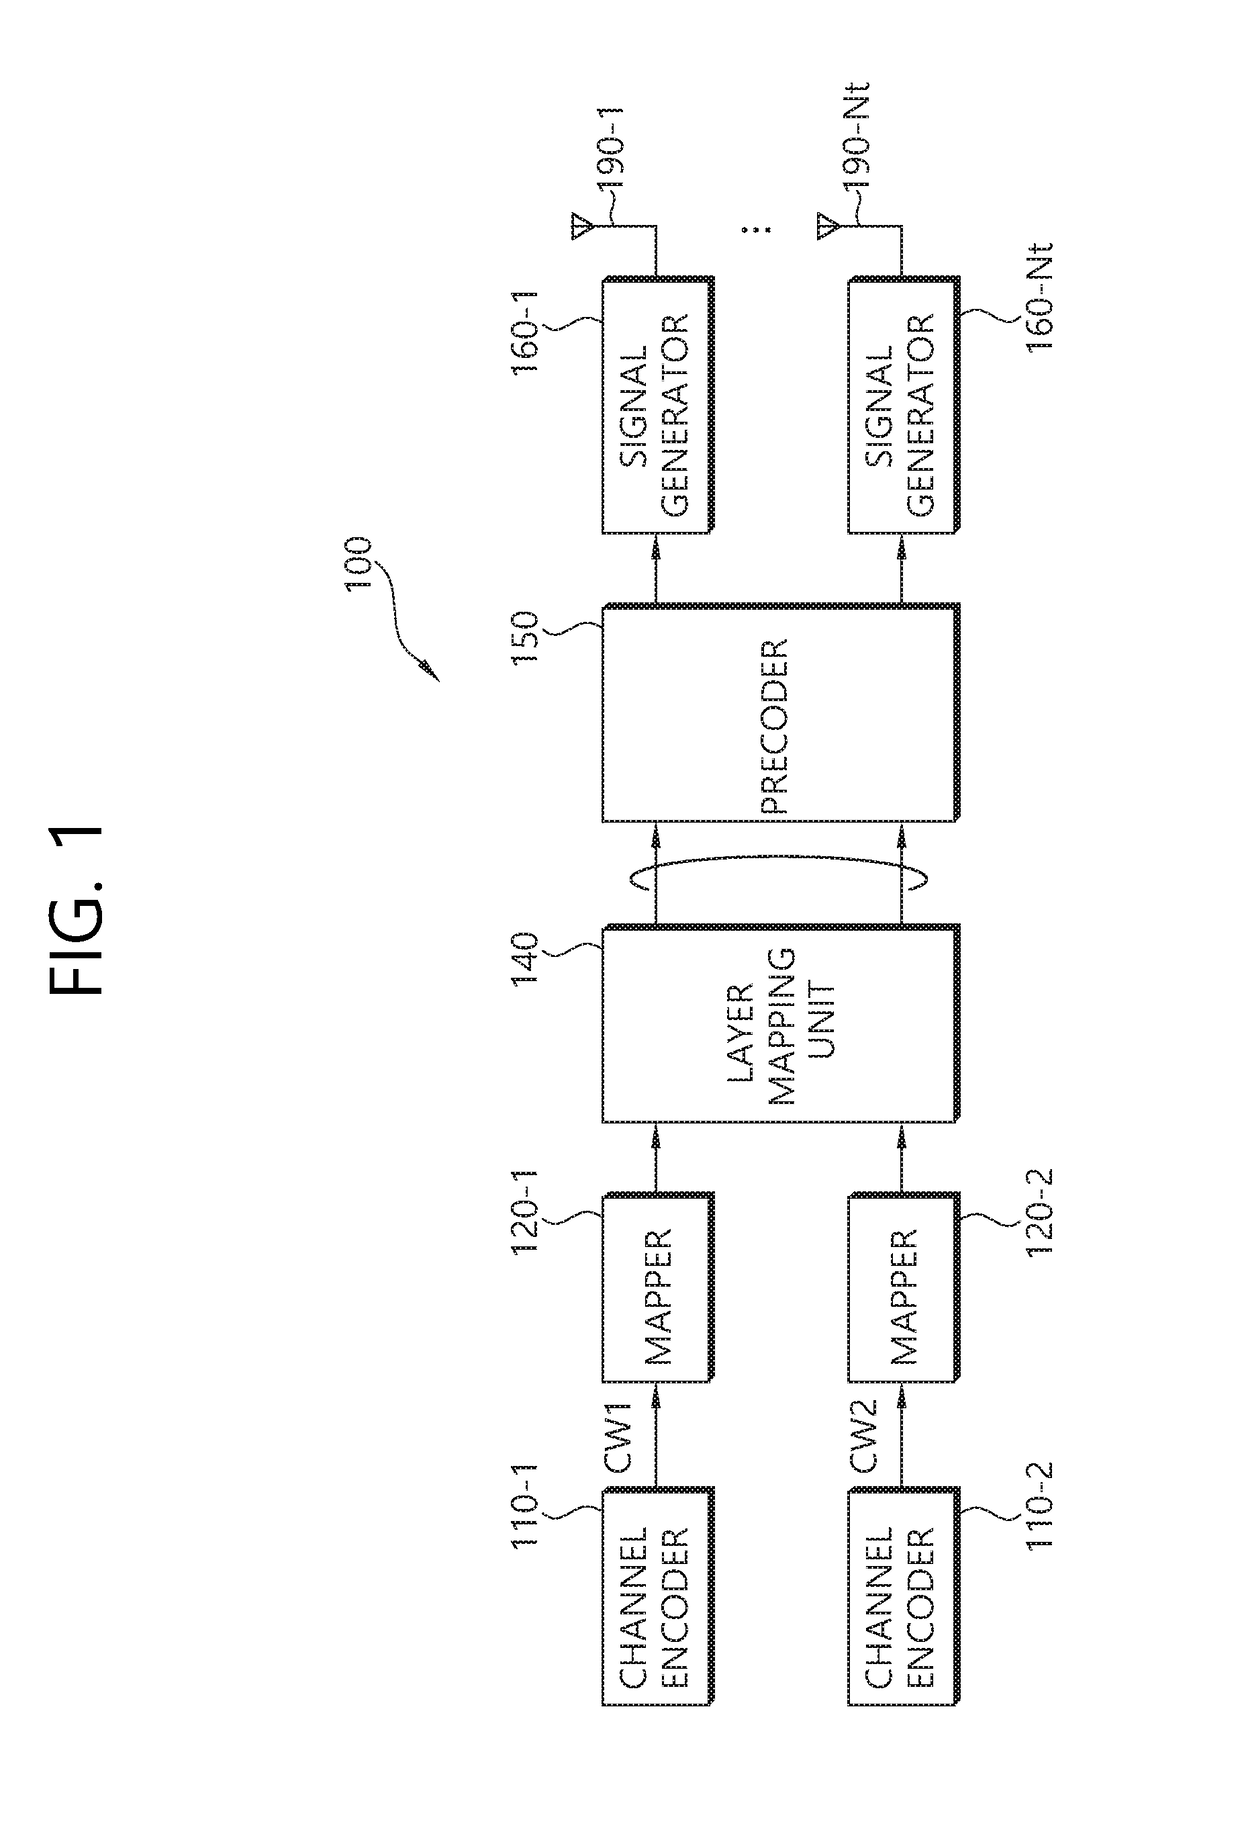 Method and apparatus for transmitting feedback signals